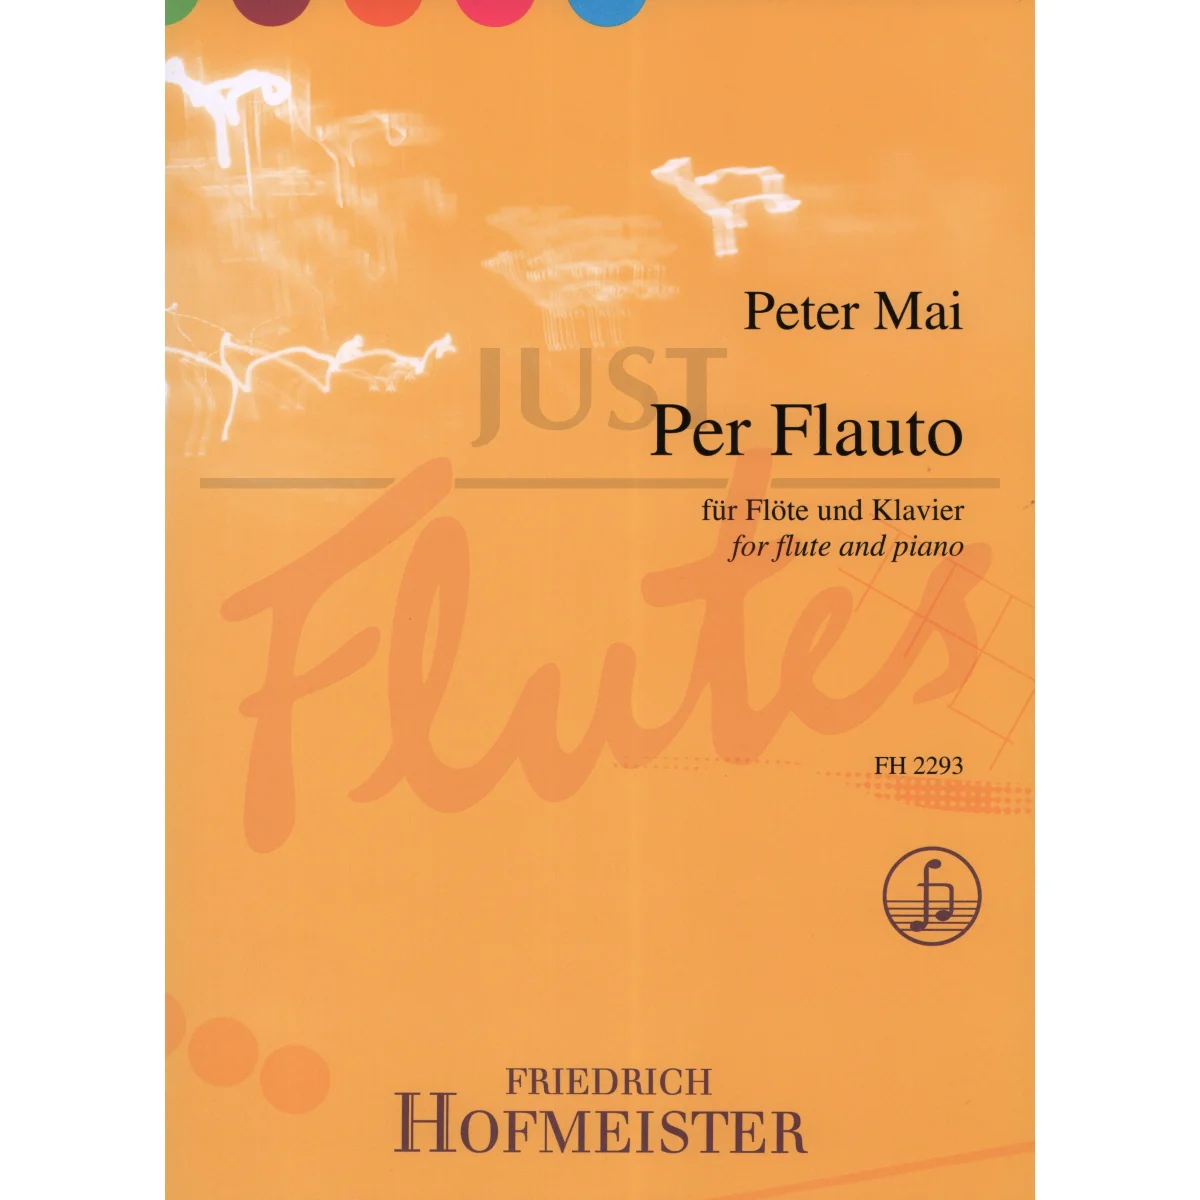 Per Flauto for Flute and Piano